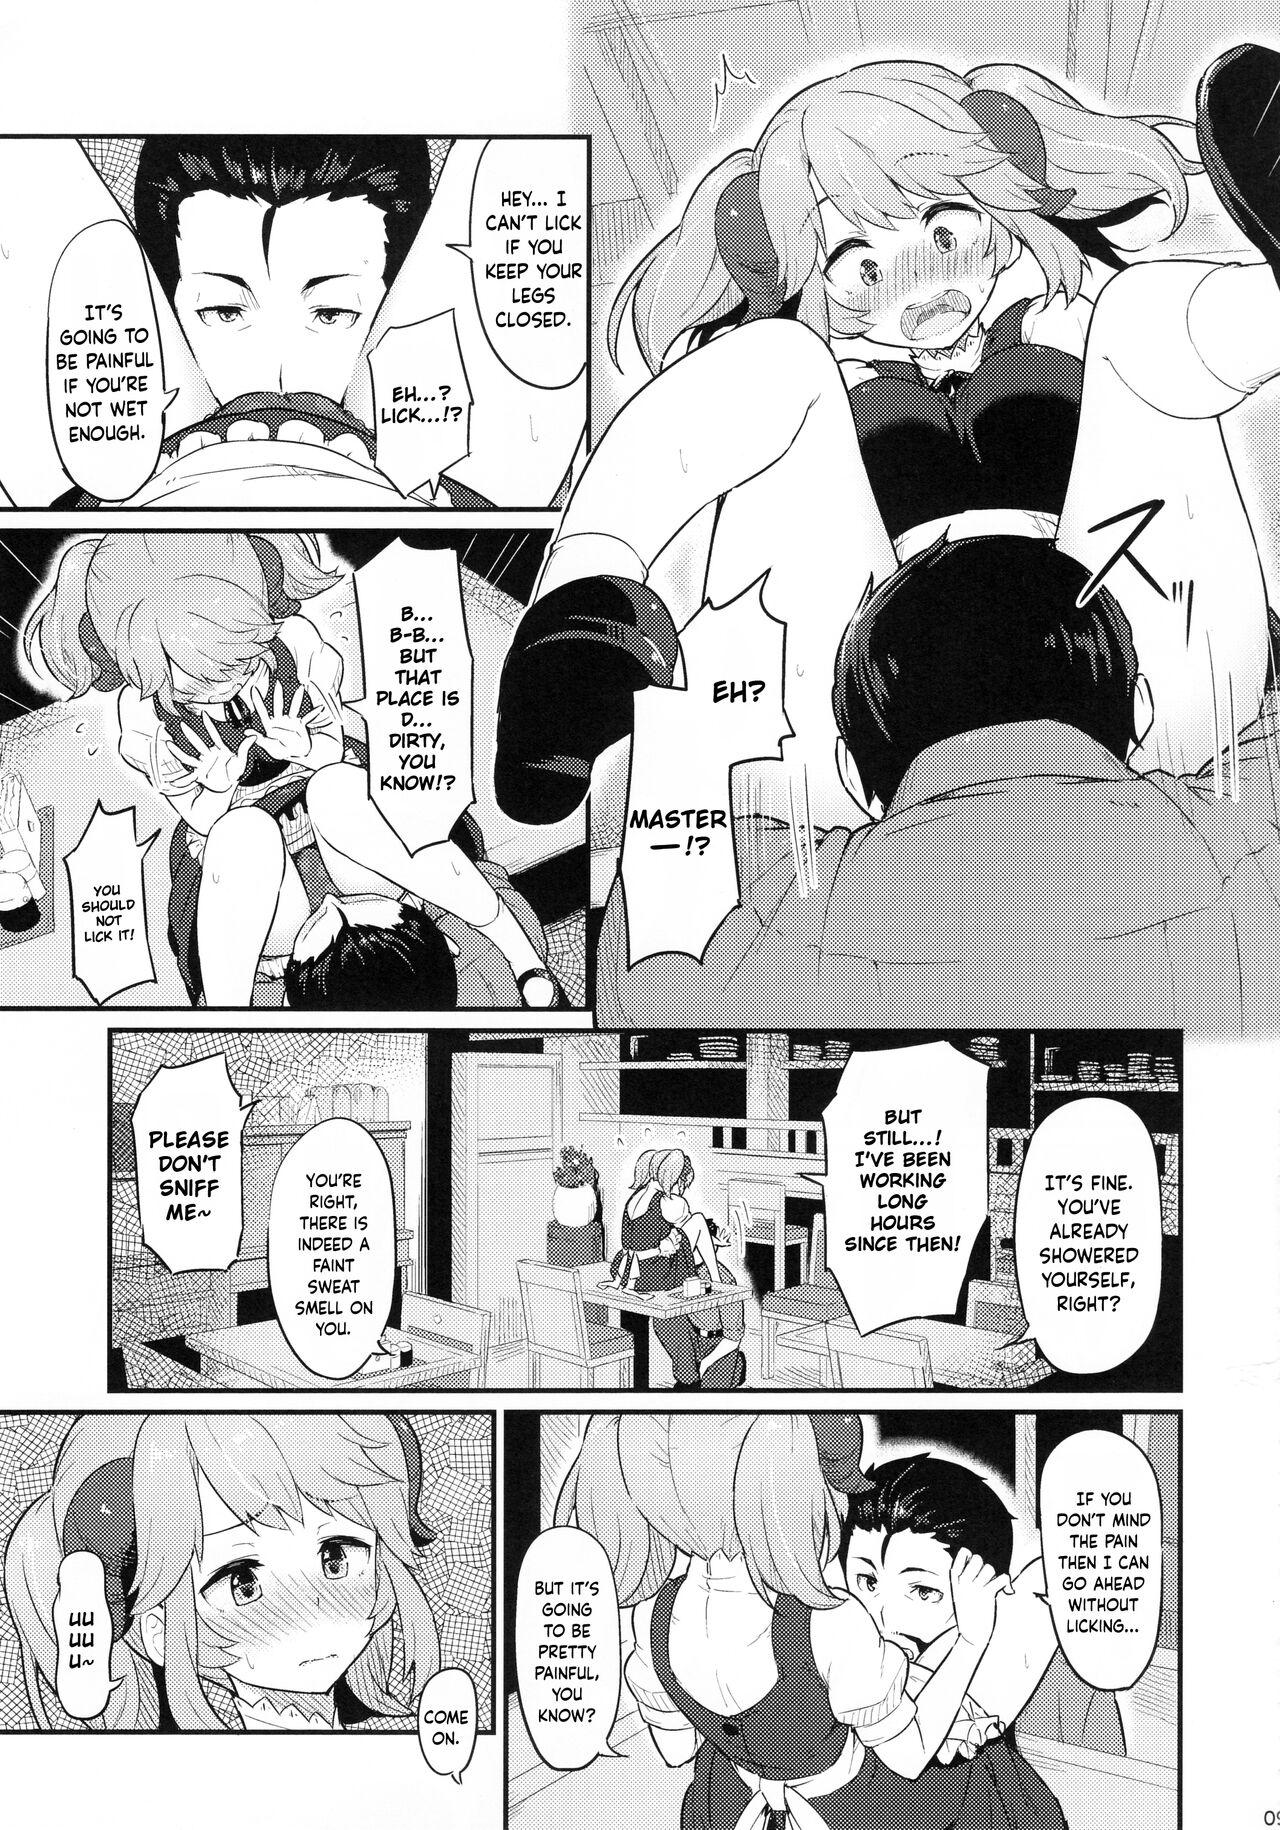 Ass Toaru Doyou no Hi | On a Certain Day of Satur - Isekai shokudou | restaurant to another world Sensual - Page 10